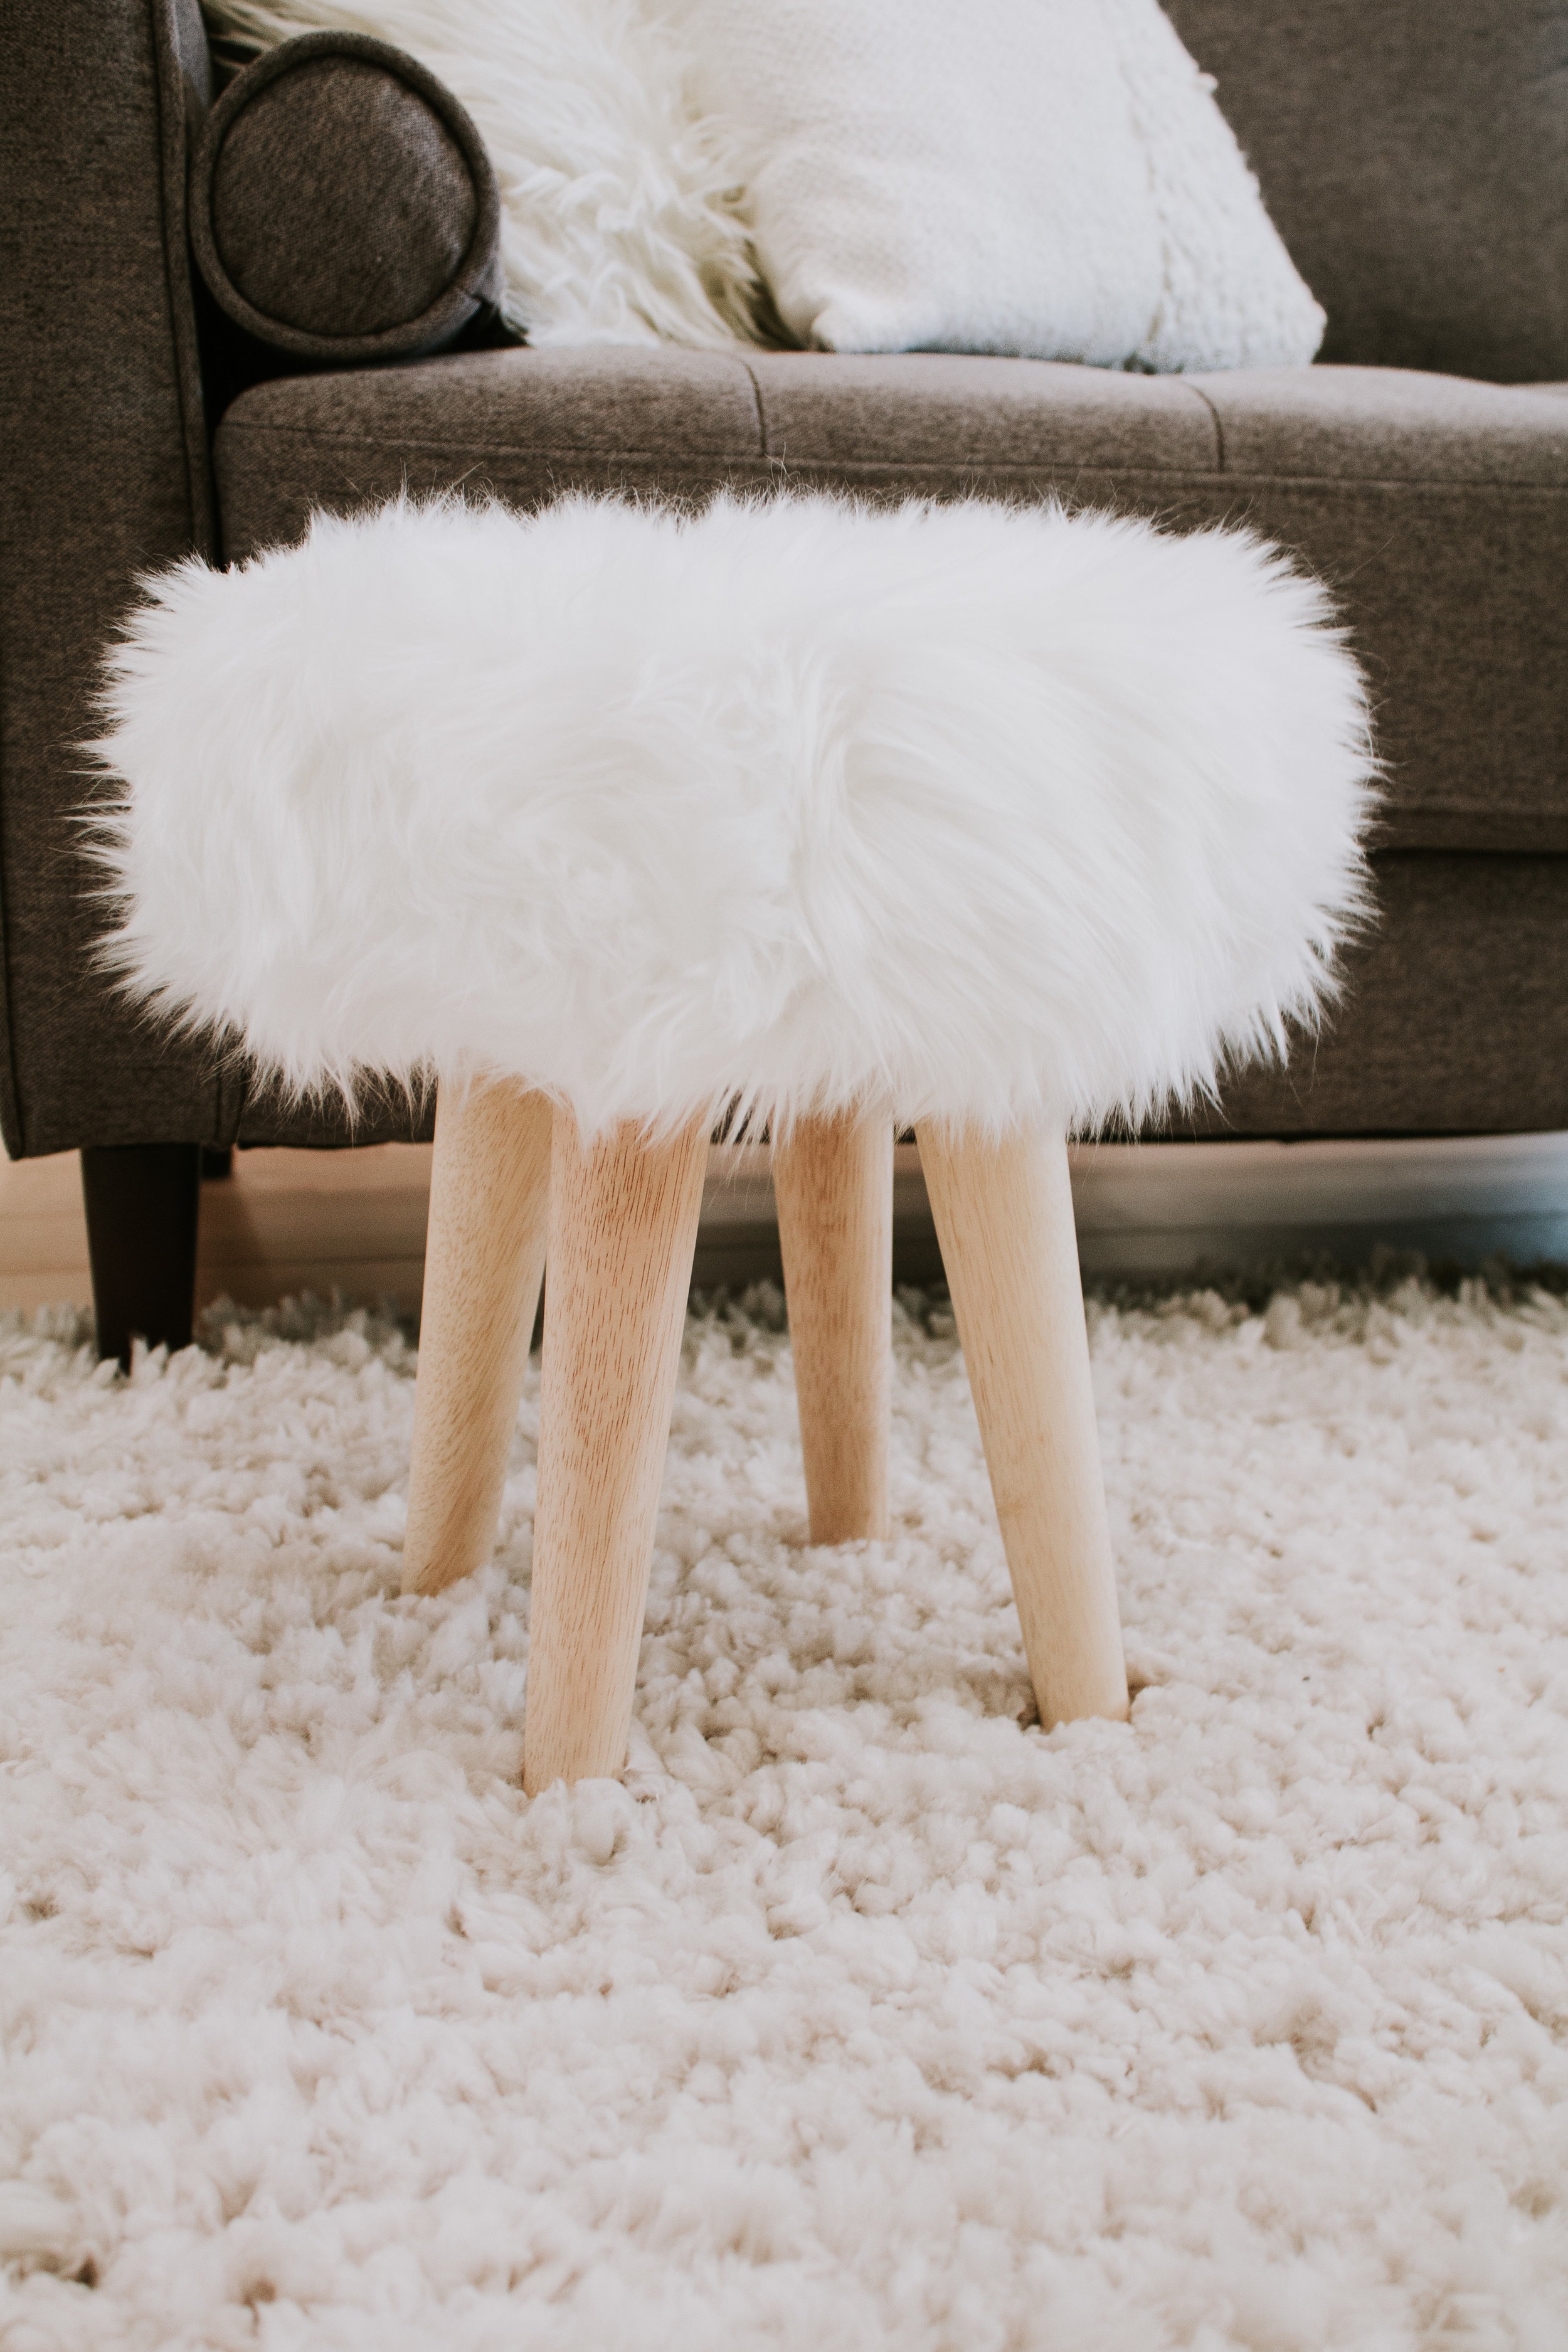 DIY Faux Fur Foot Stool - make your own modern fluffy foot stool